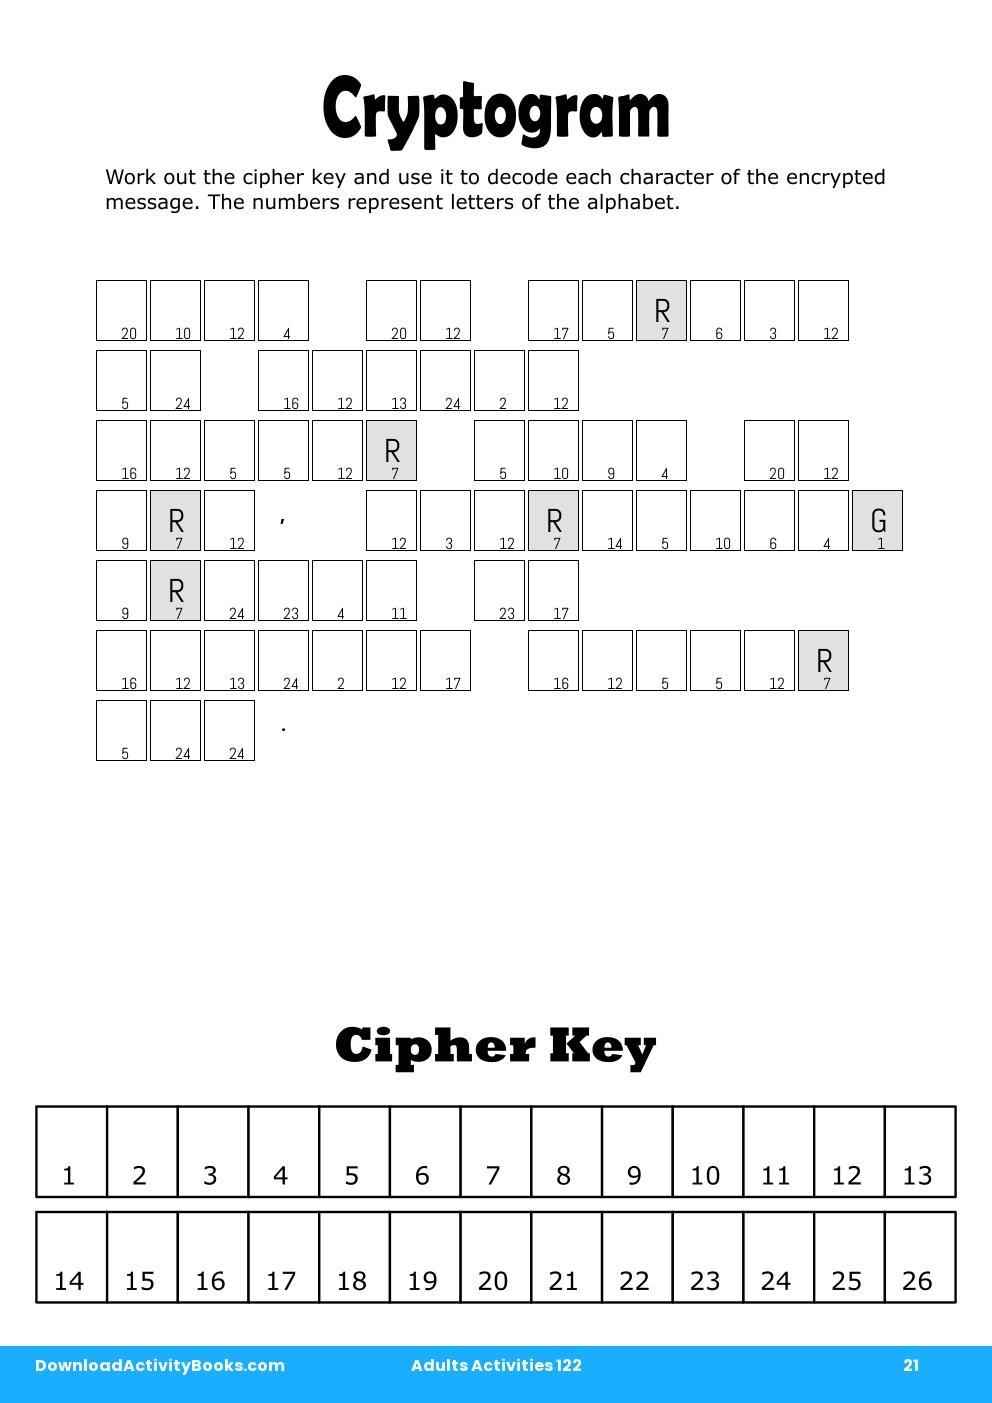 Cryptogram in Adults Activities 122